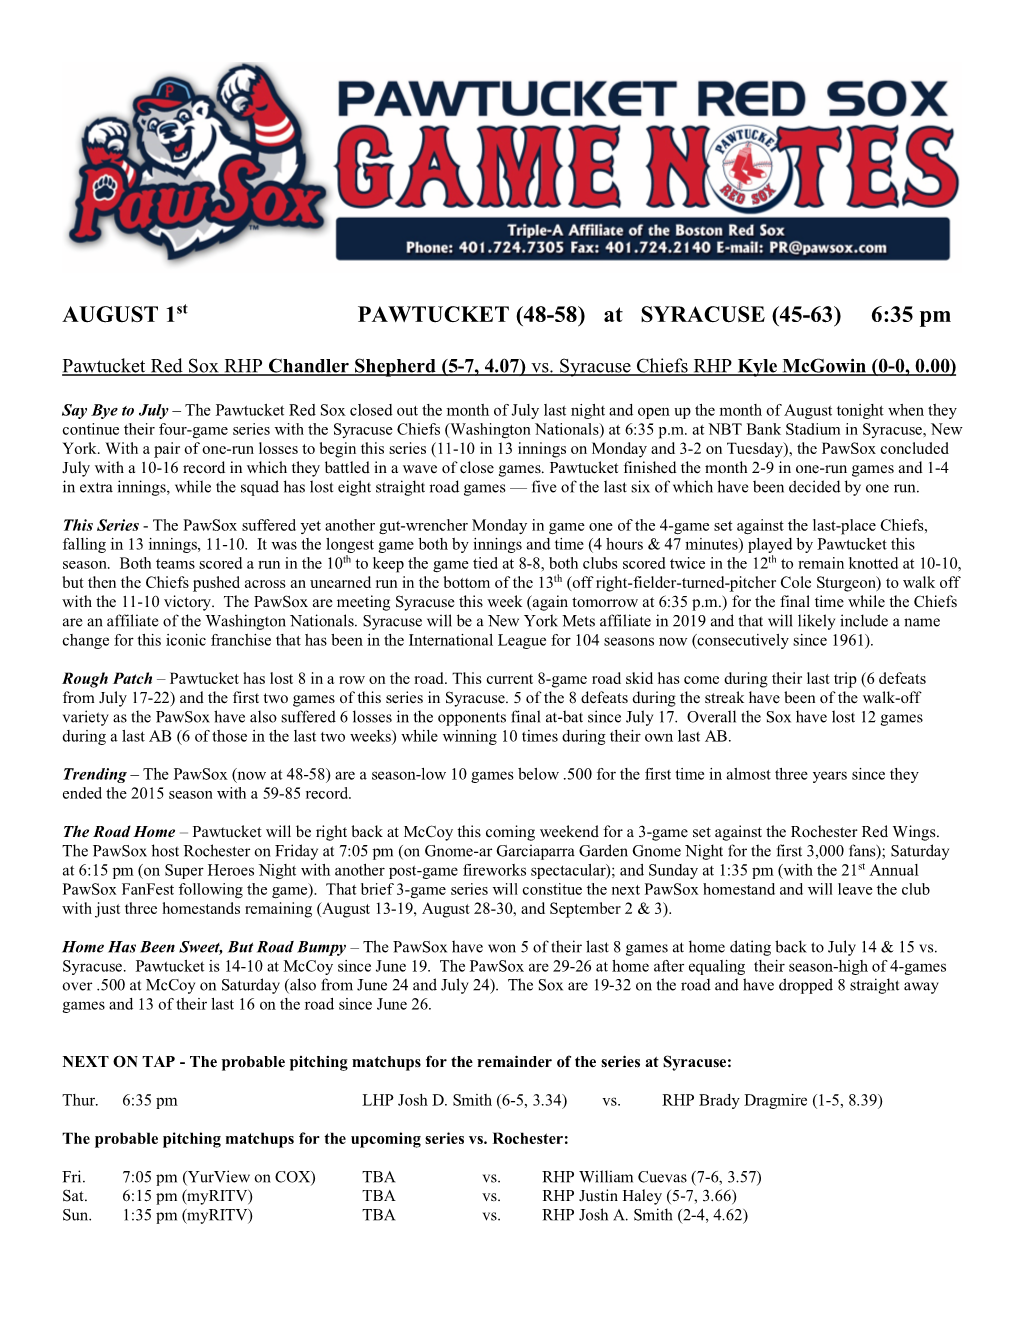 AUGUST 1St PAWTUCKET (48-58) at SYRACUSE (45-63) 6:35 Pm